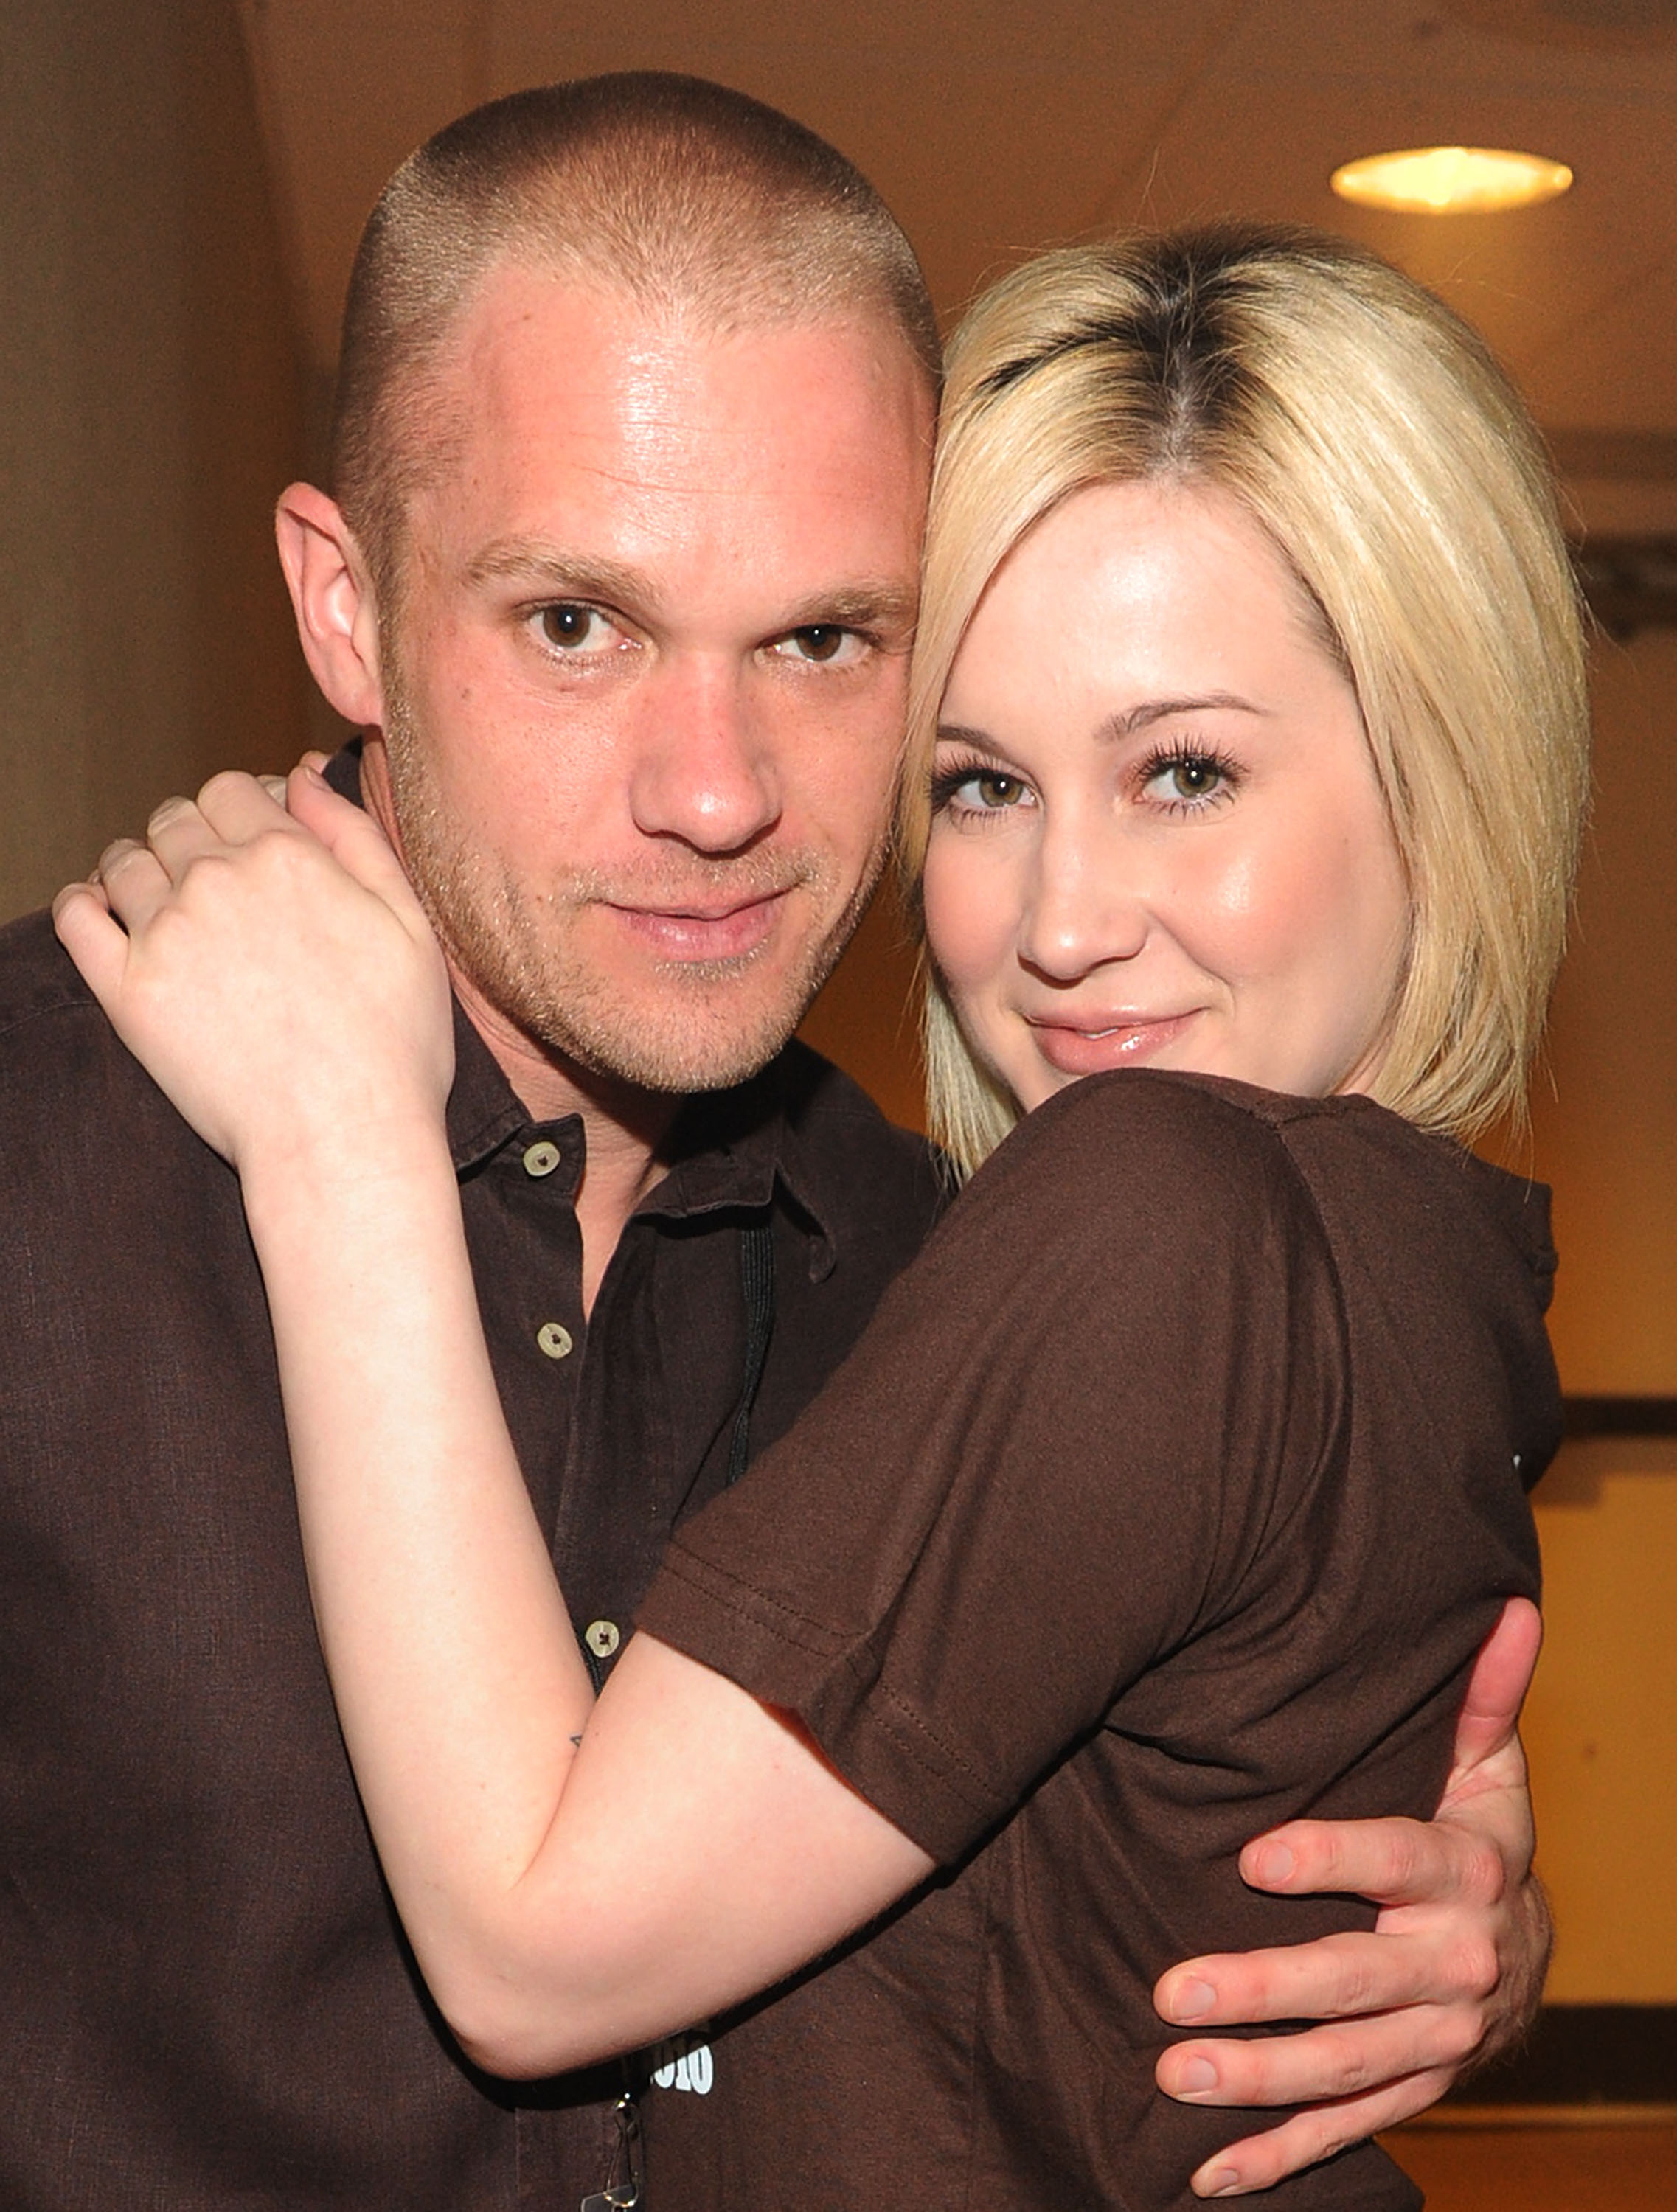 Kyle Jacobs with Kellie Pickler backstage during the "Music City Keep on Playin'" benefit concert at the Ryman Auditorium, on May 16, 2010, in Nashville, Tennessee. | Source: Getty Images